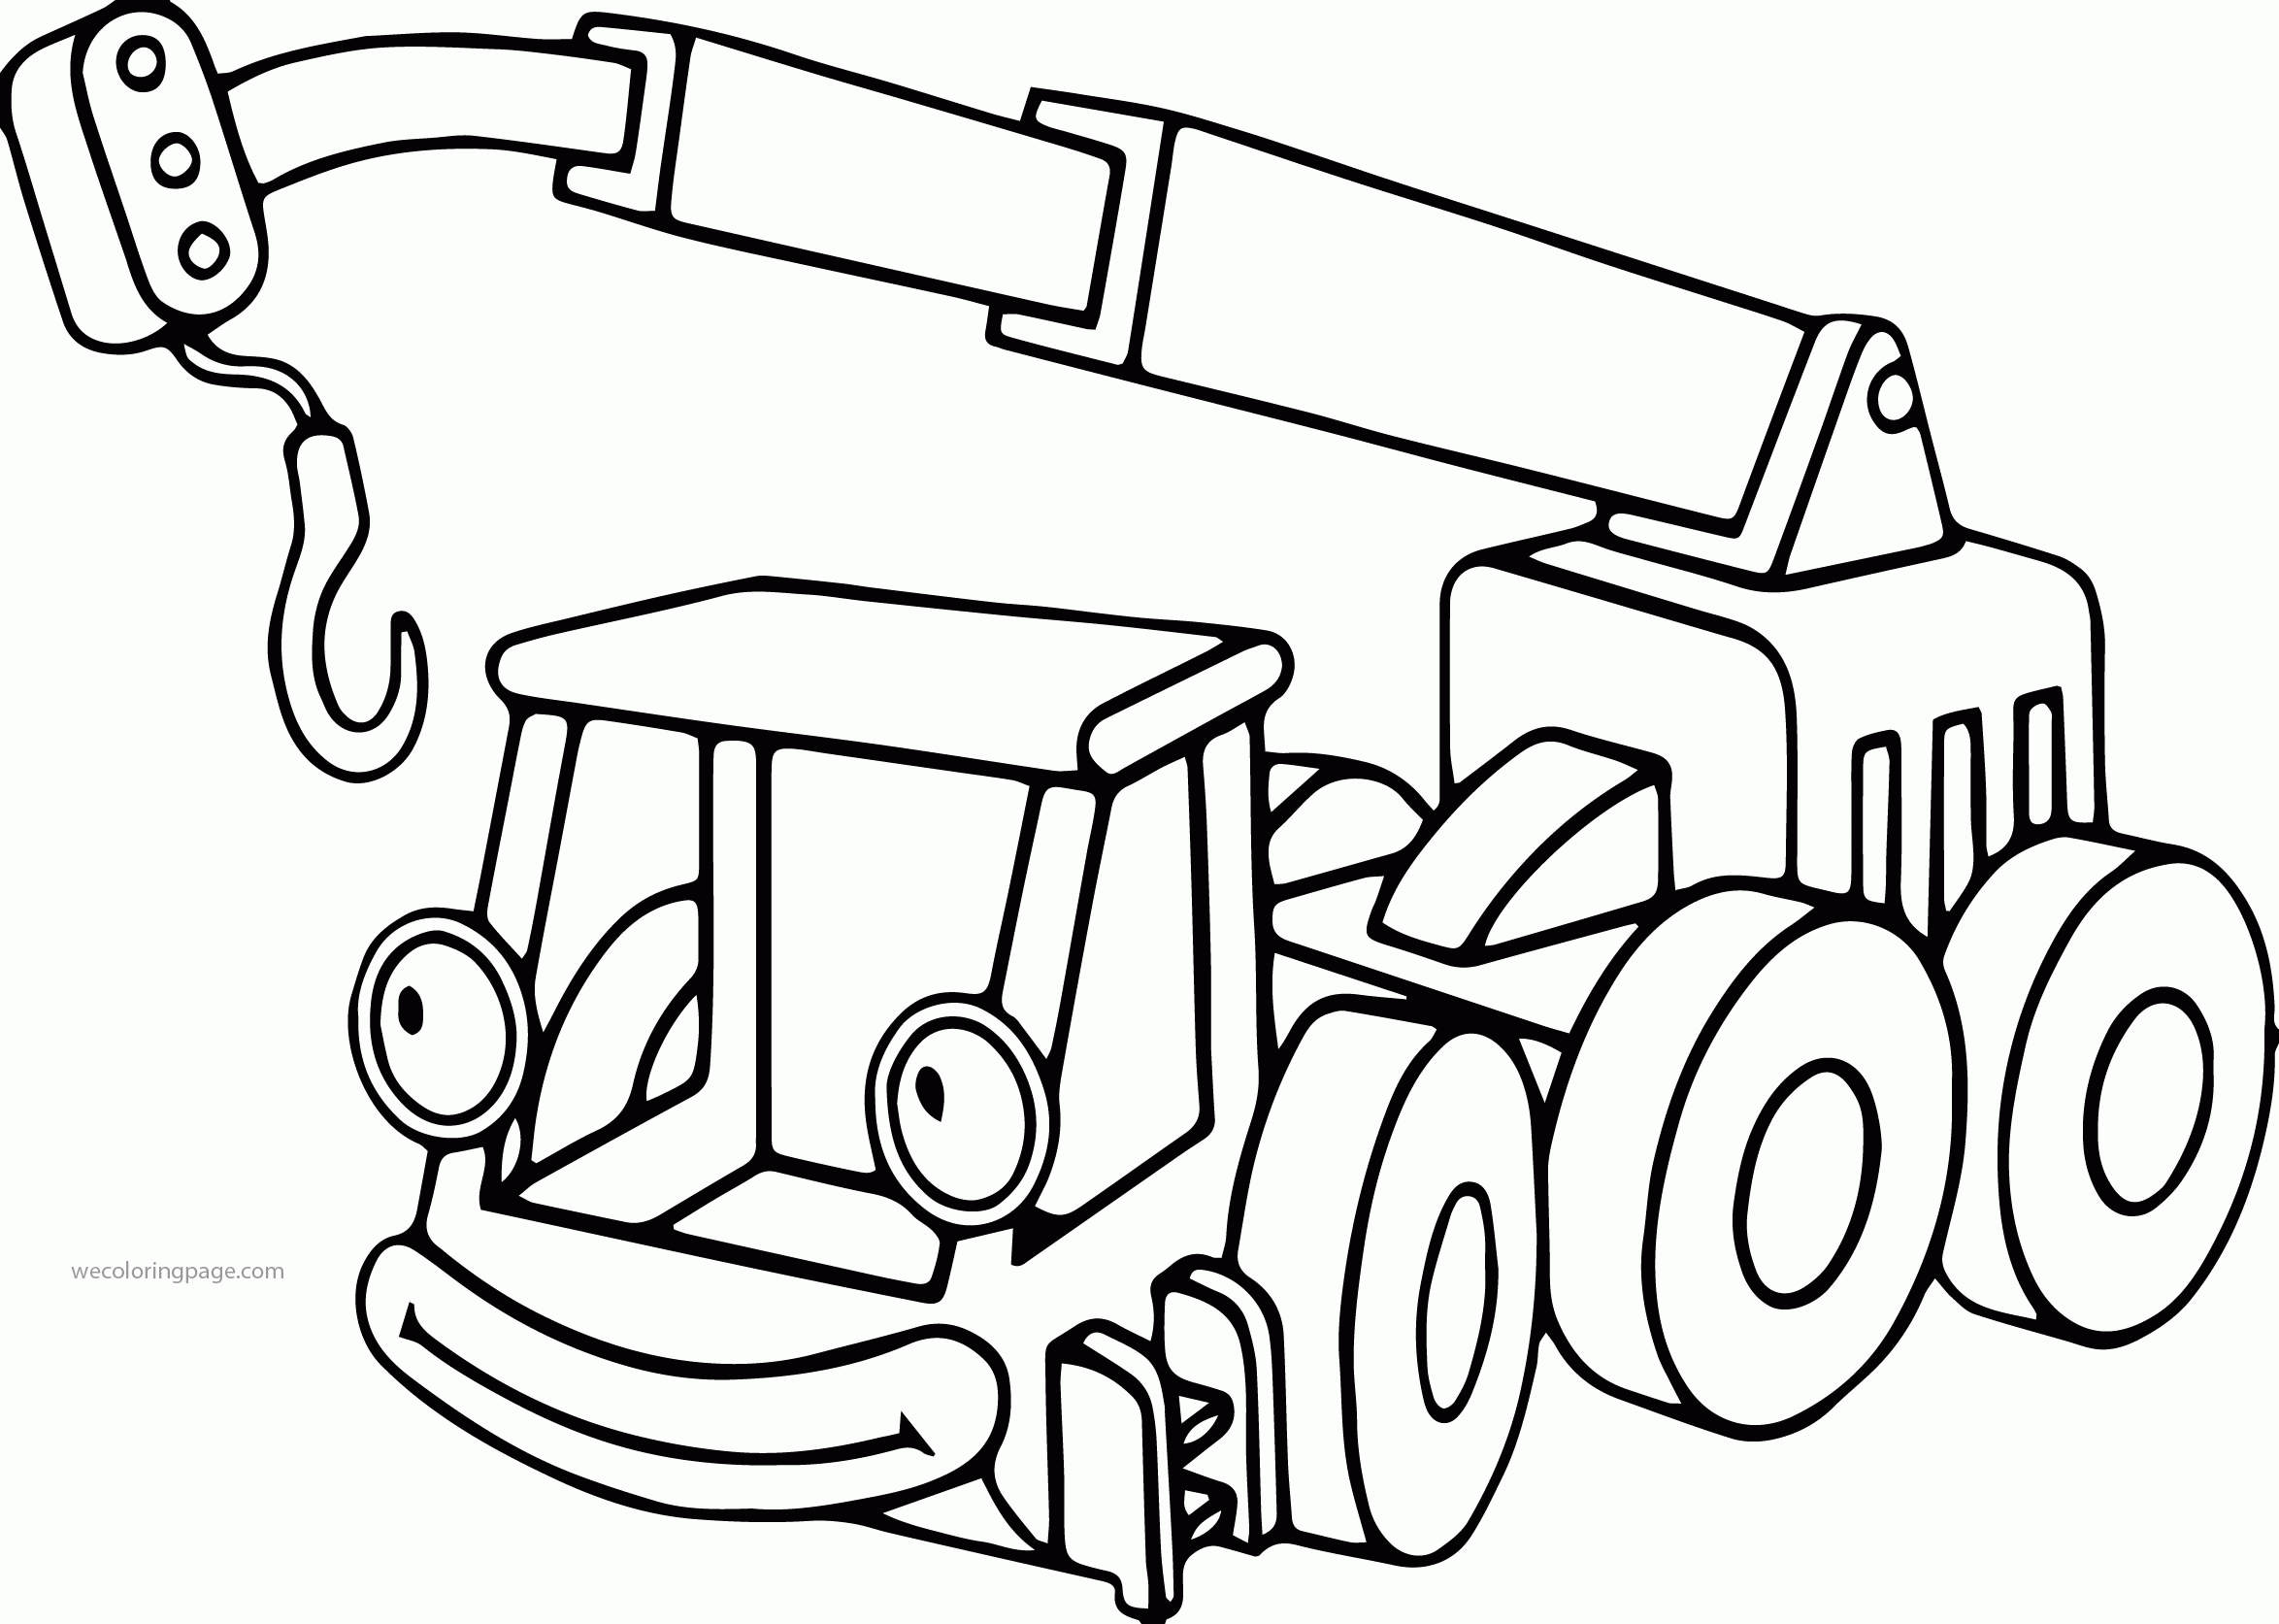 Bob The Builder Lofty Coloring Page | Wecoloringpage